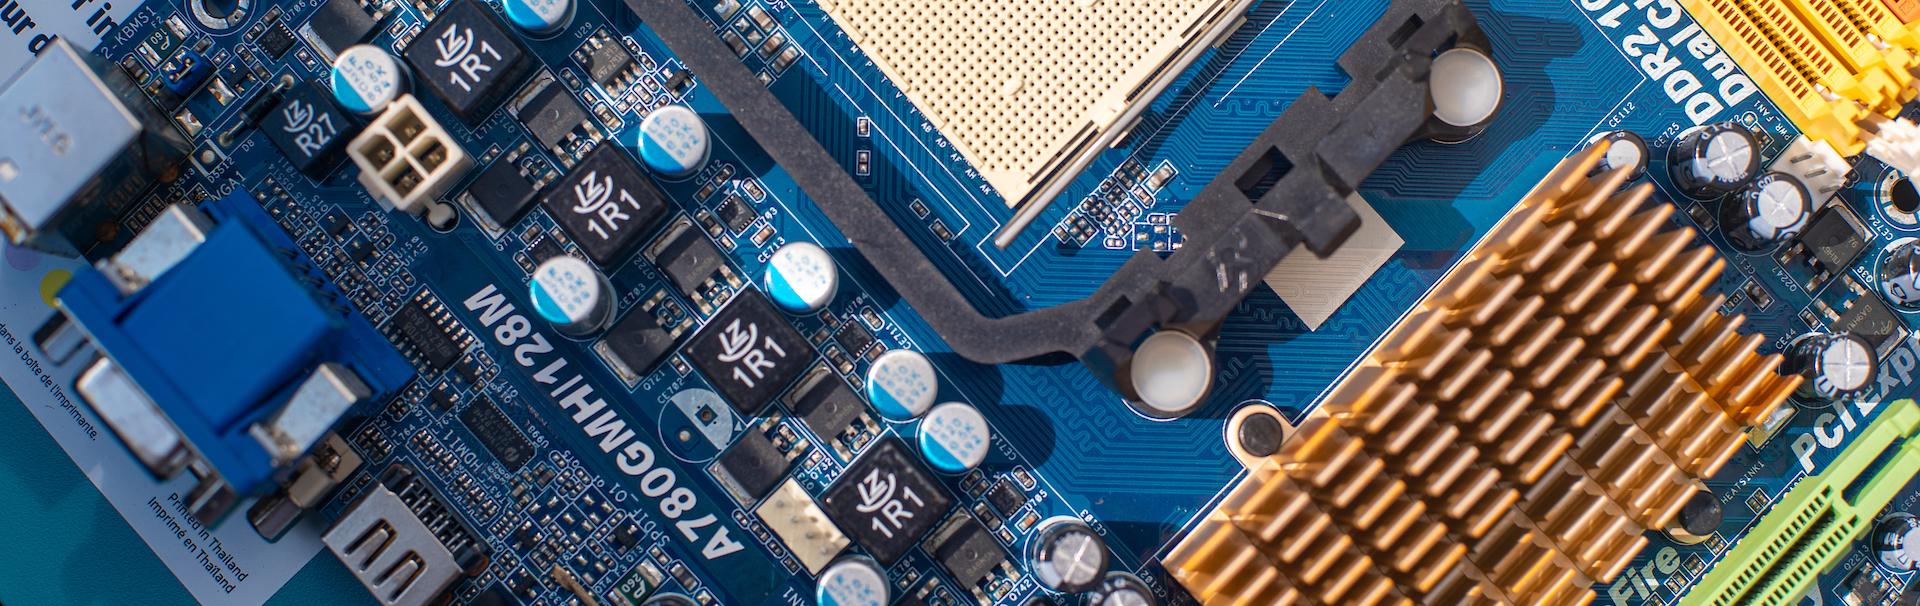 Zoomed in image of a motherboard from an electronic device.